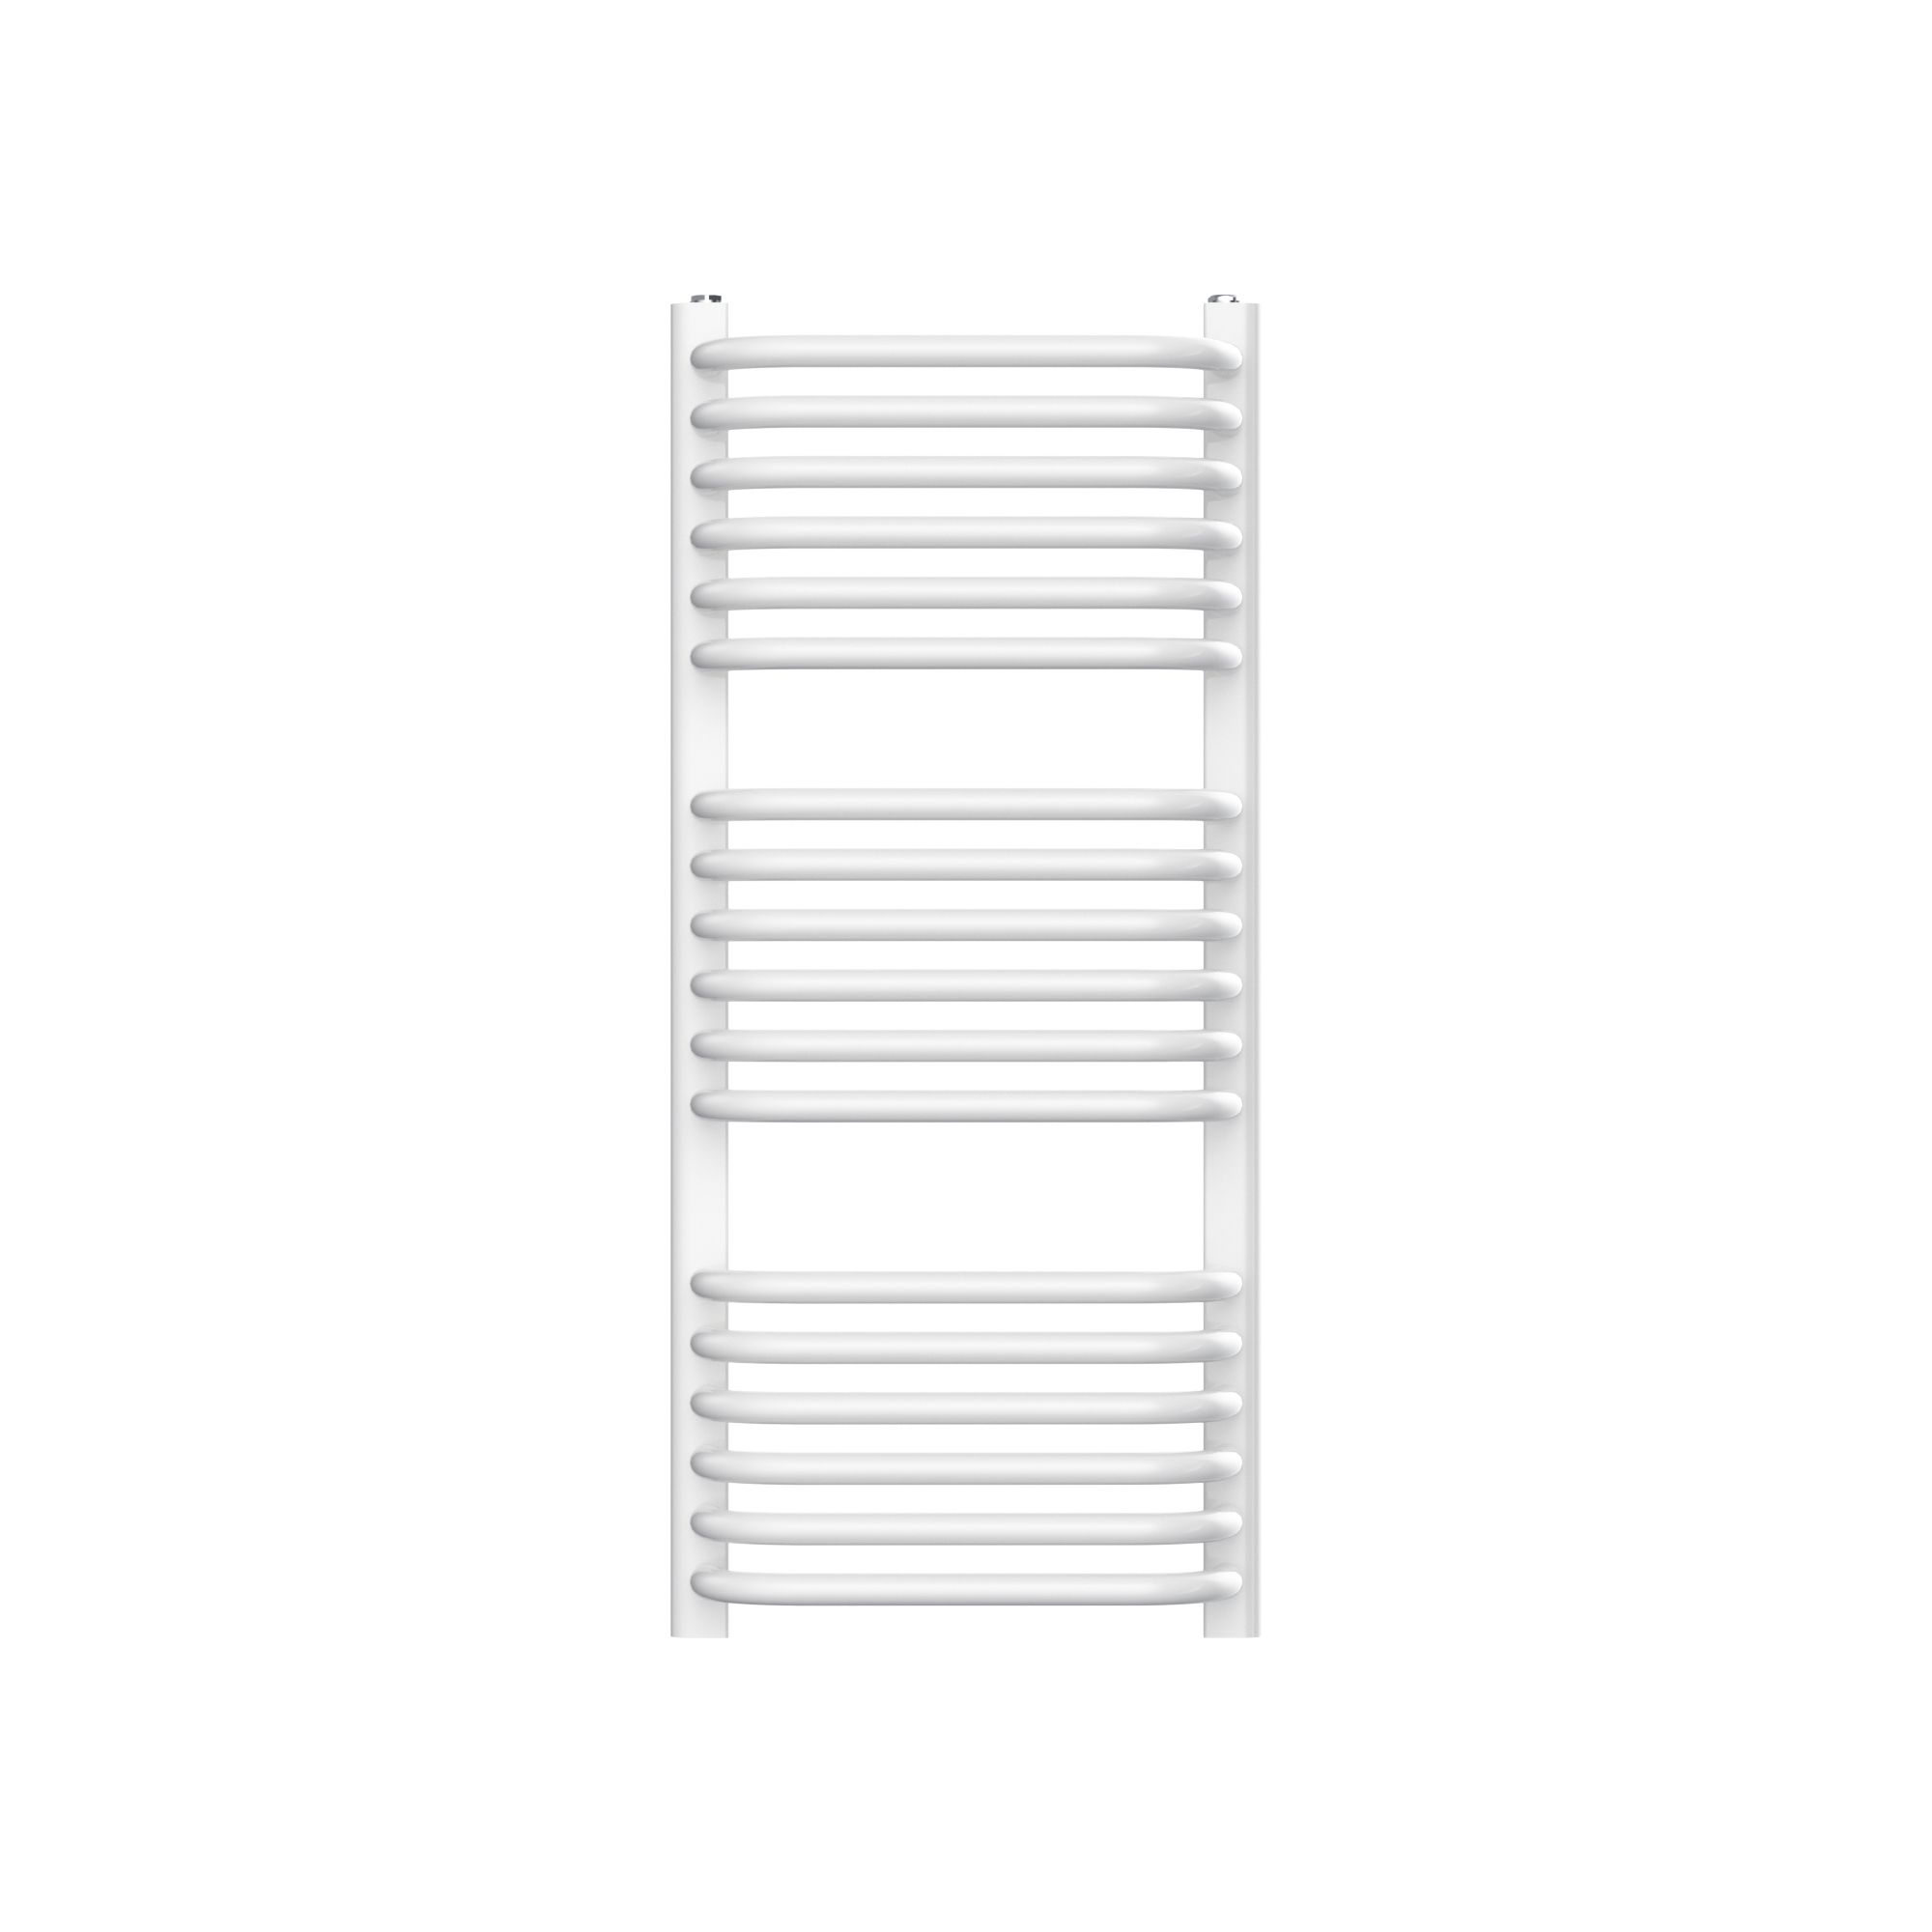 GoodHome Lilium, White Vertical Curved Towel radiator (W)400mm x (H)900mm